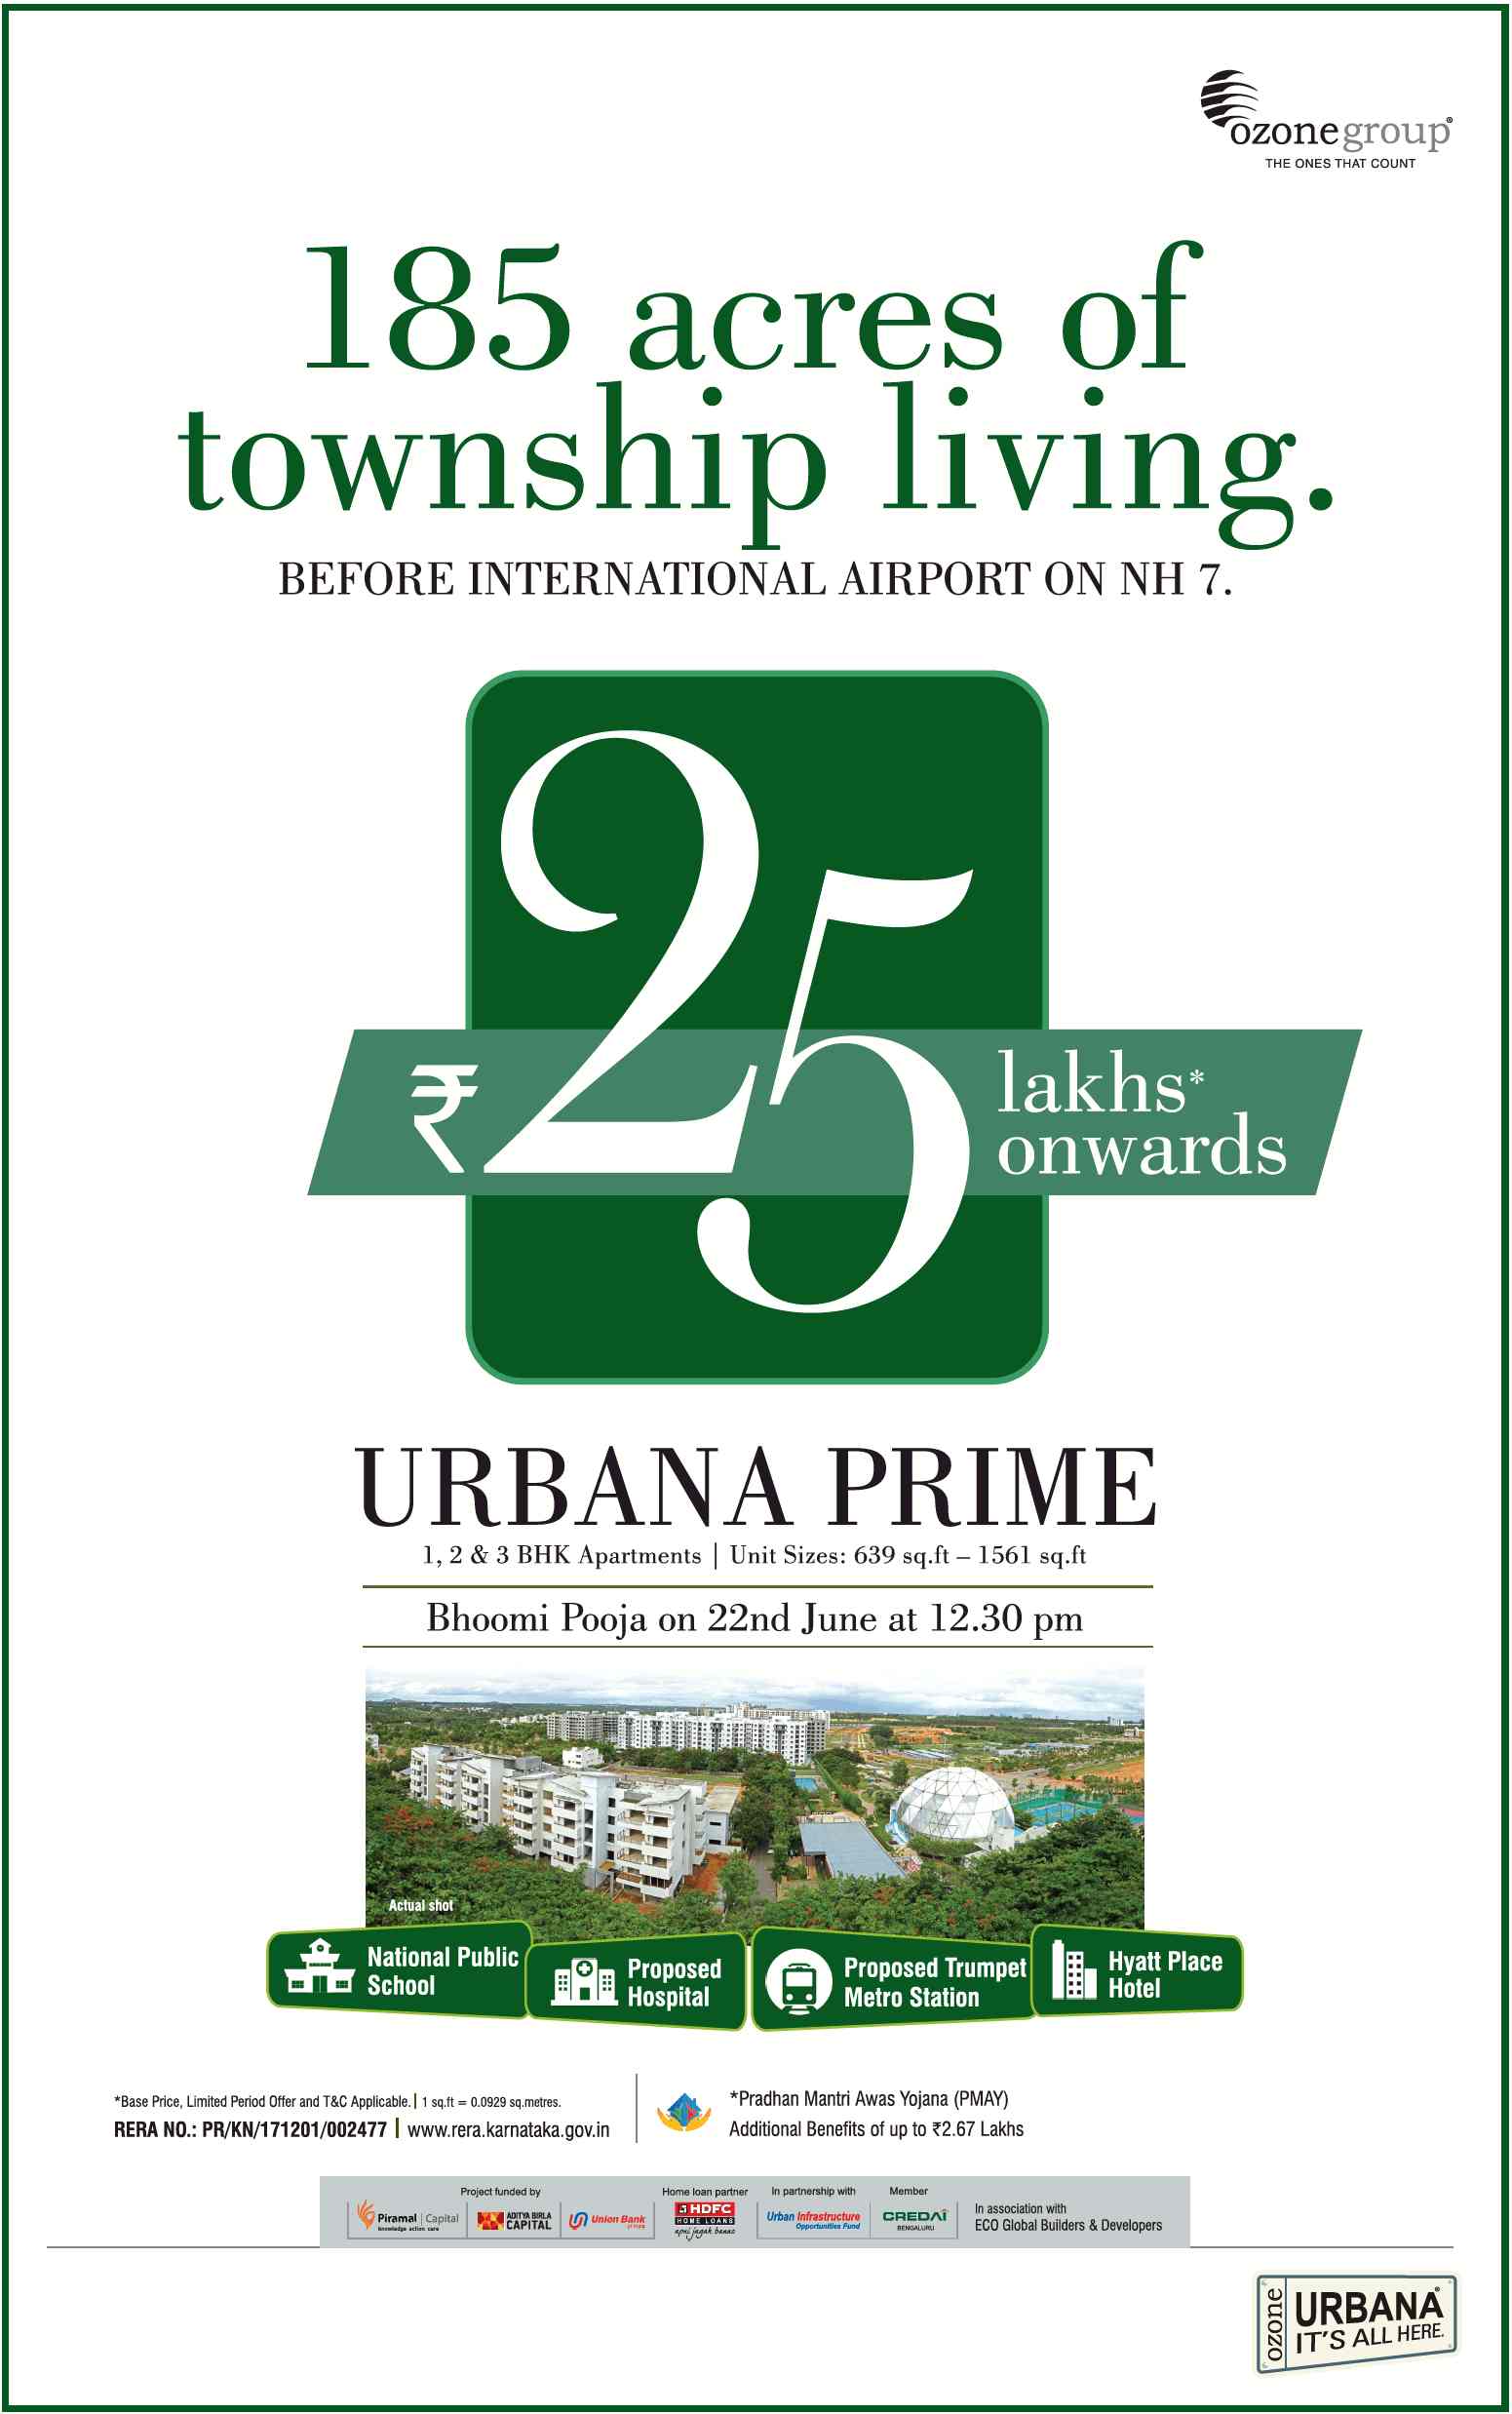 Book 1, 2 & 3 BHK apartments starting from Rs. 25 lakhs onwards at Ozone Urbana Prime in Bangalore Update